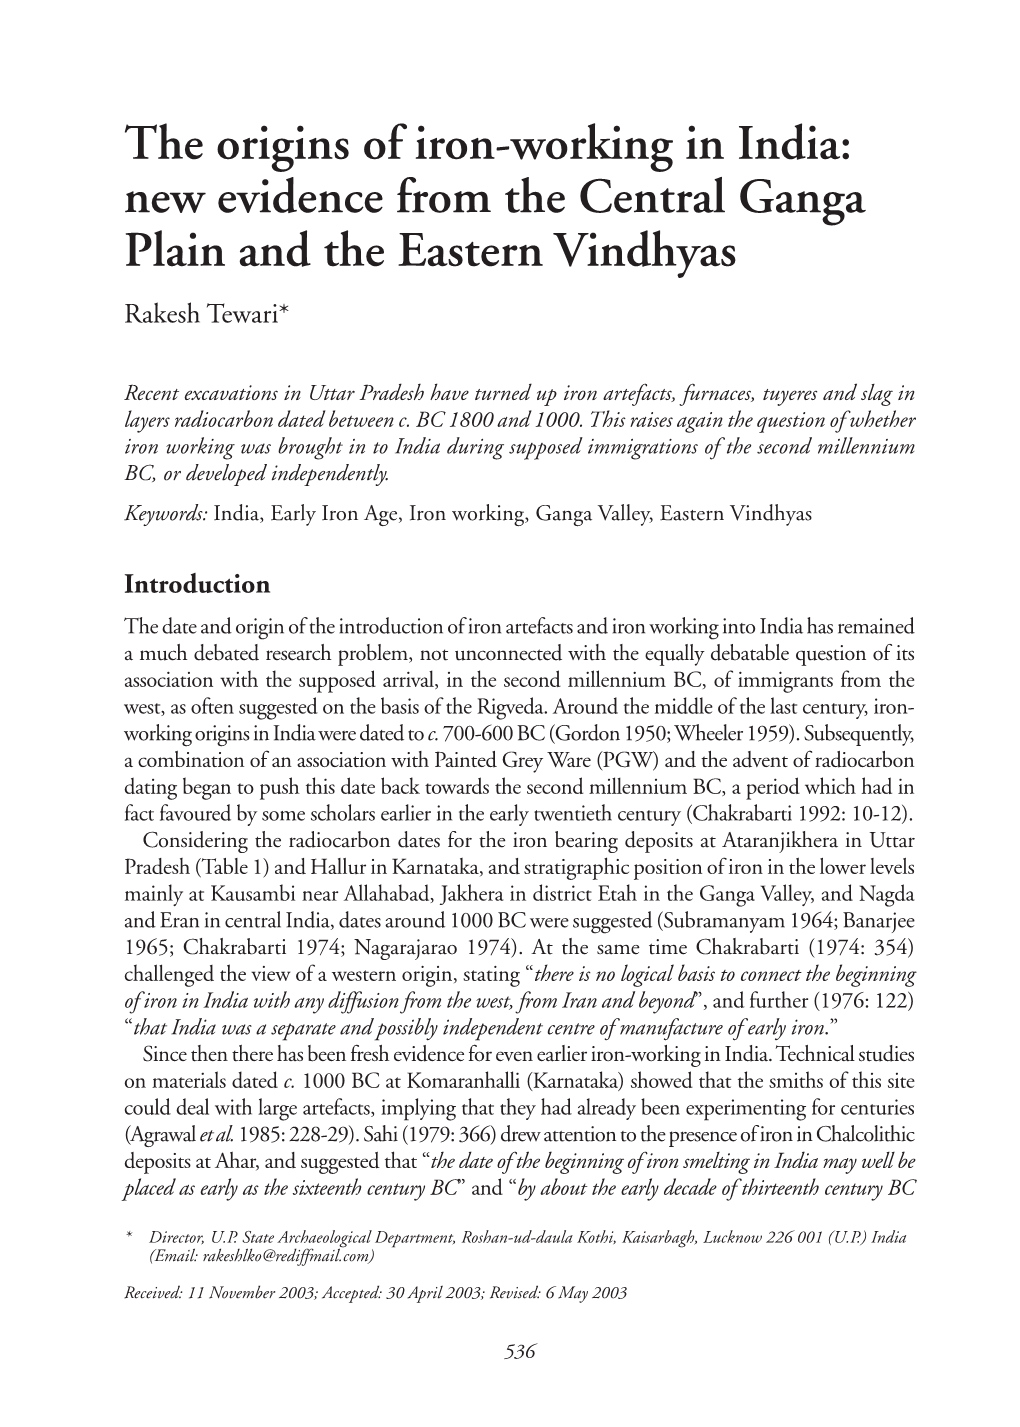 The Origins of Iron-Working in India: New Evidence from the Central Ganga Plain and the Eastern Vindhyas Rakesh Tewari*